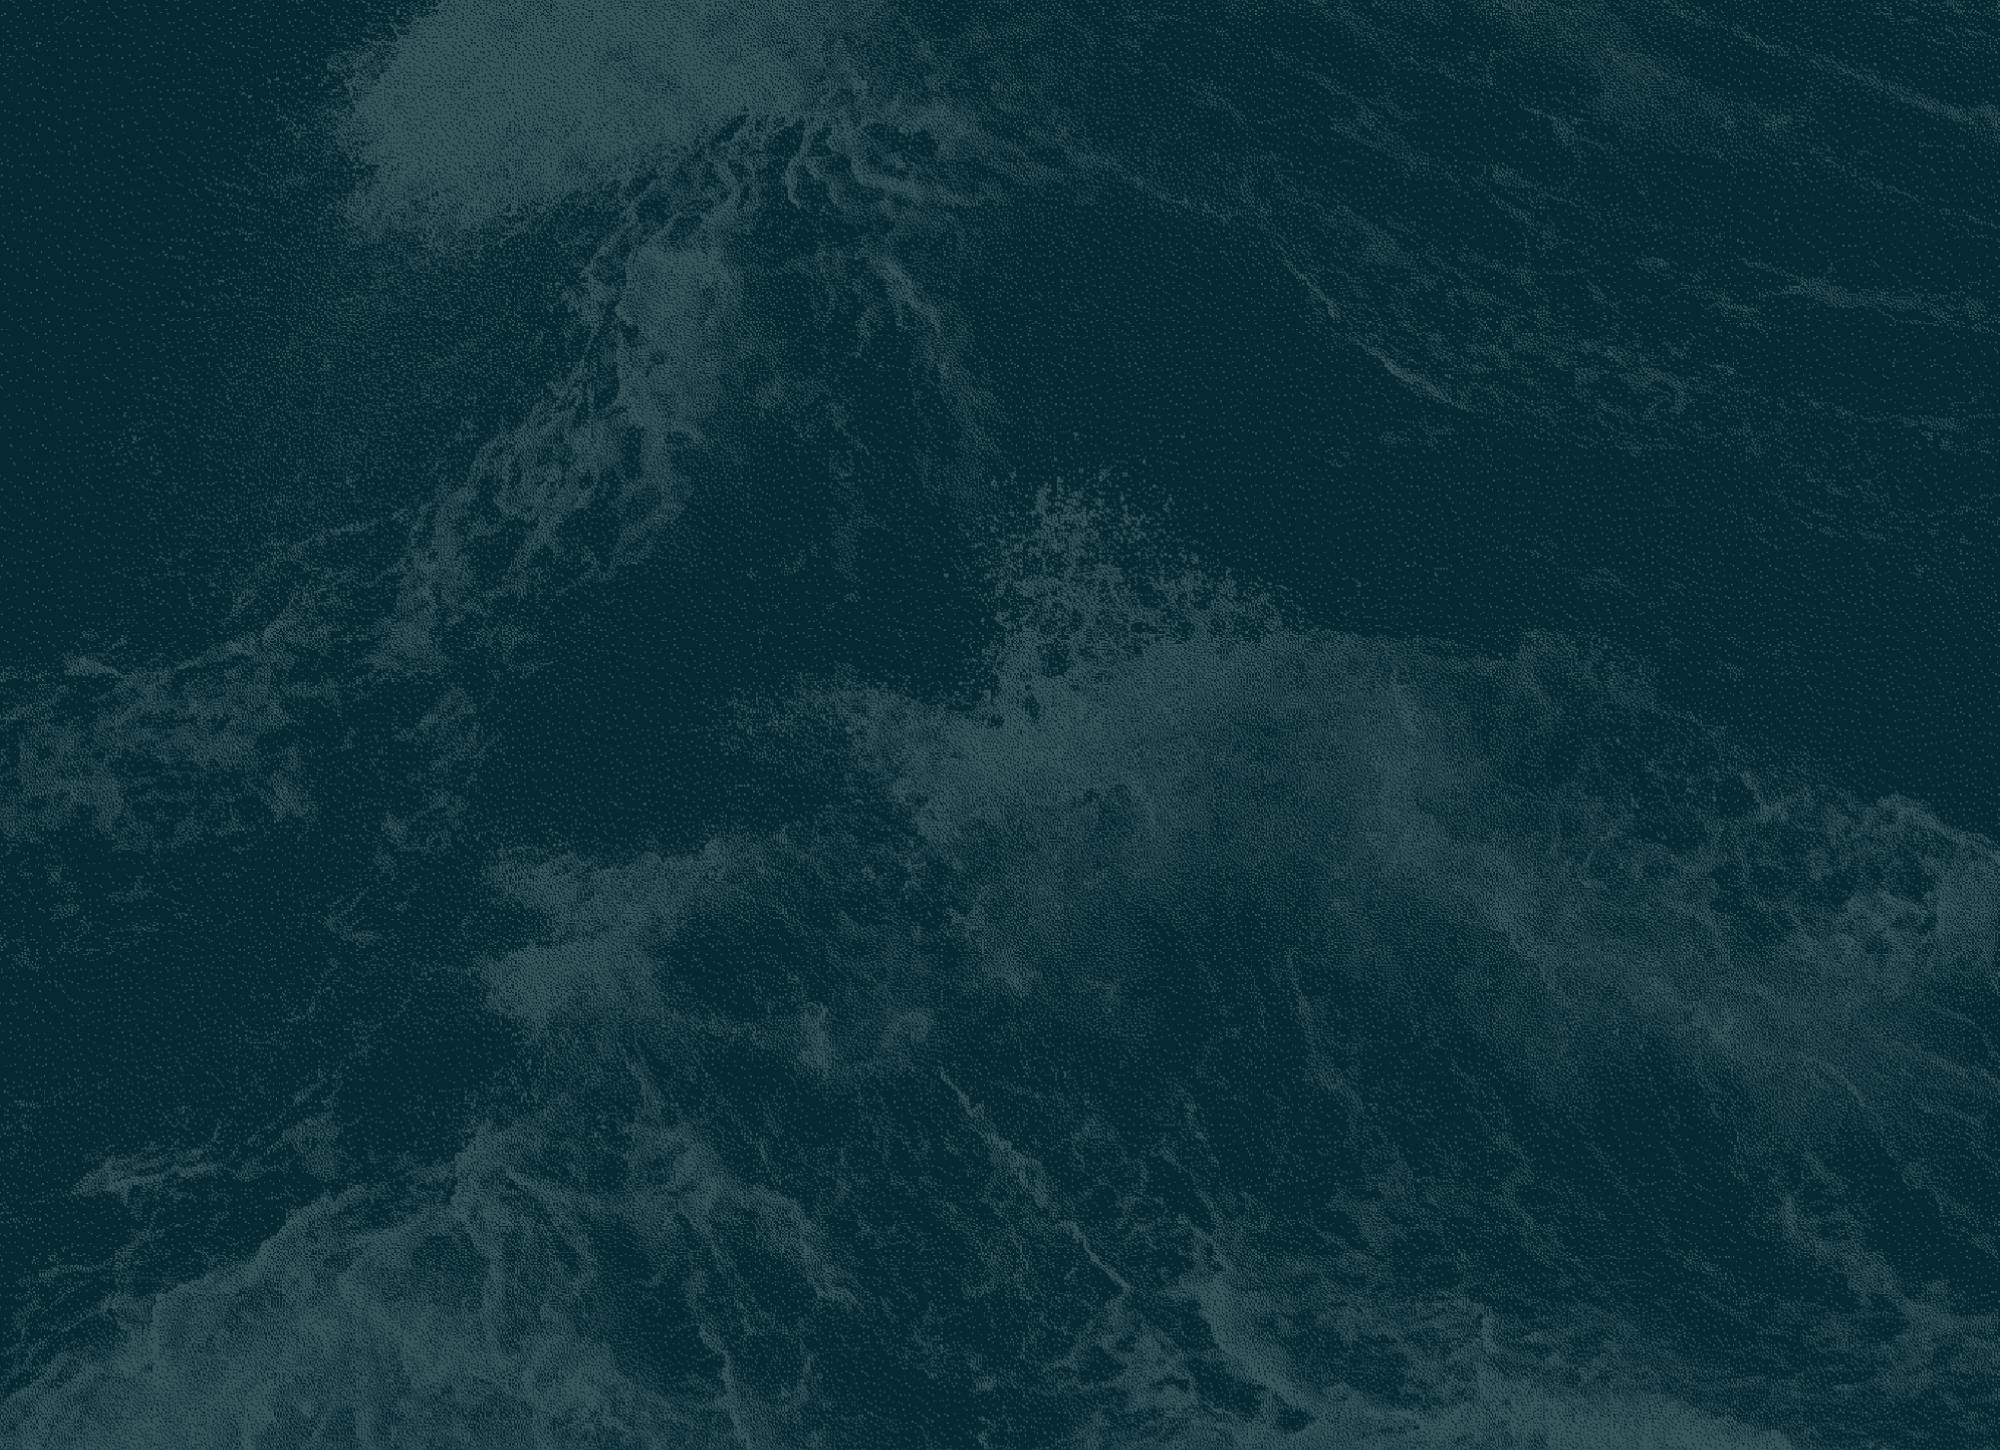 a background bitmap image of ocean waves